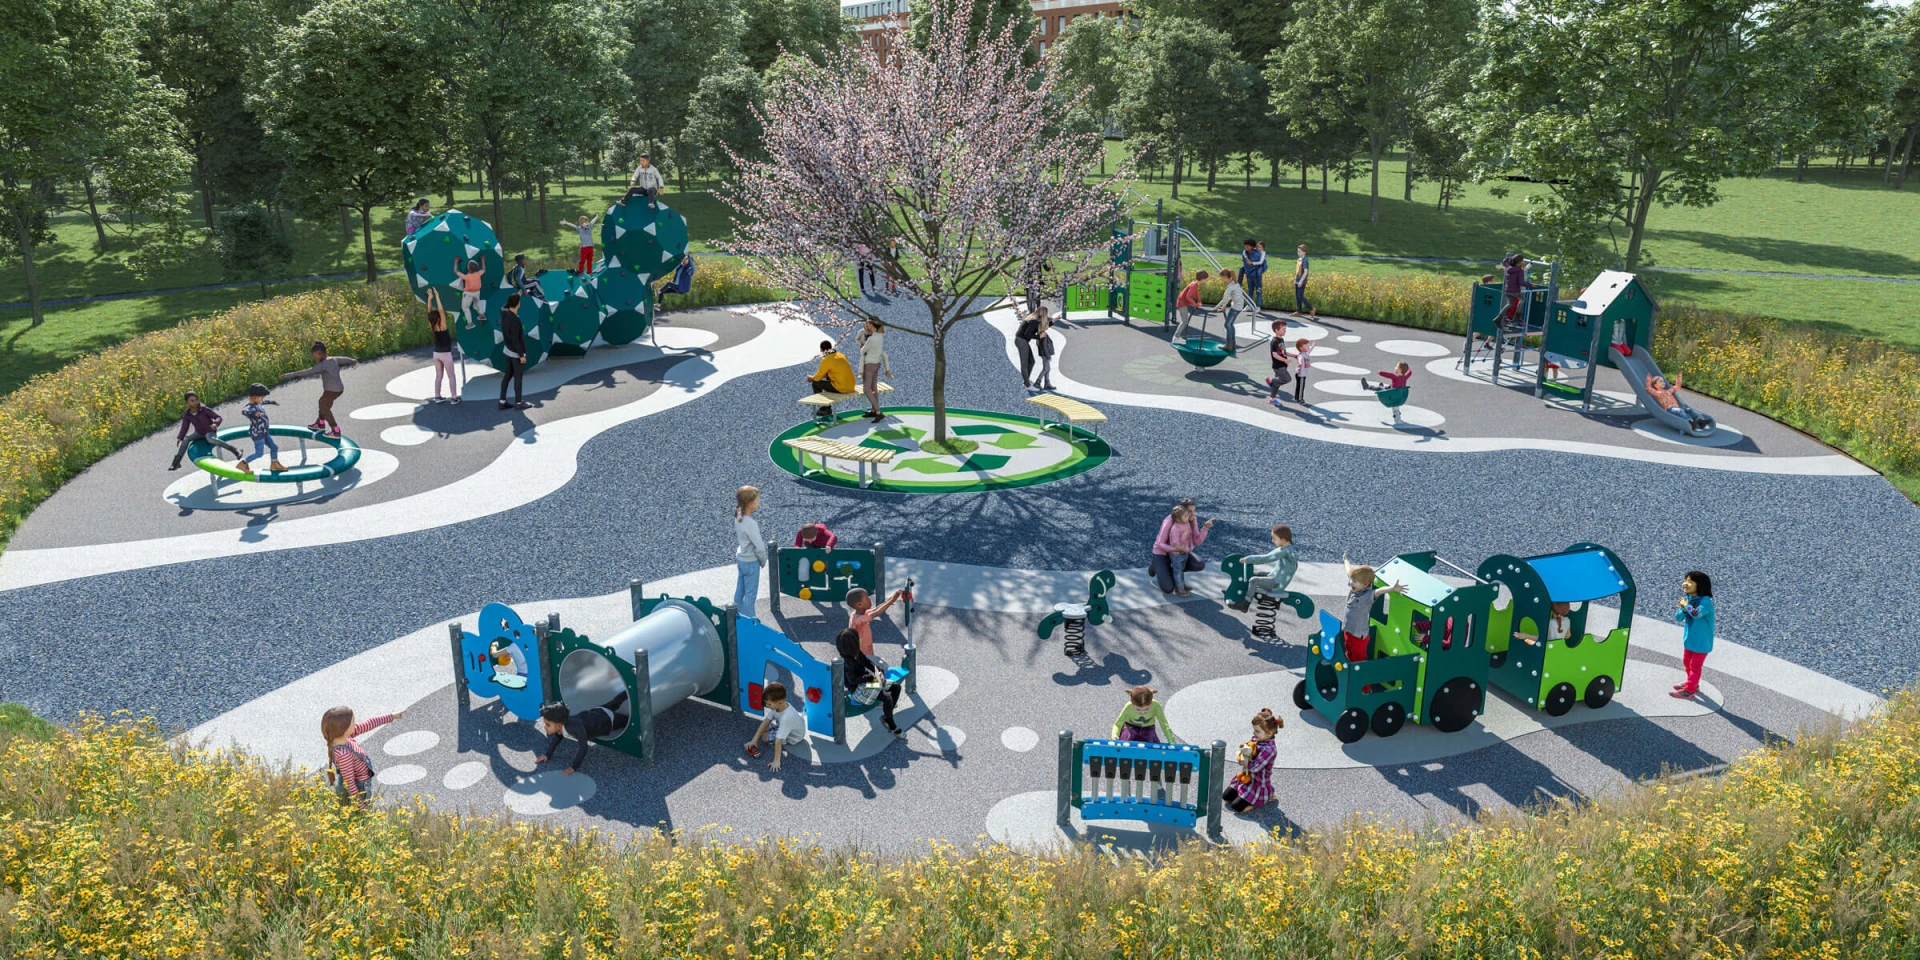 Design idea of a low carbon playground in a park